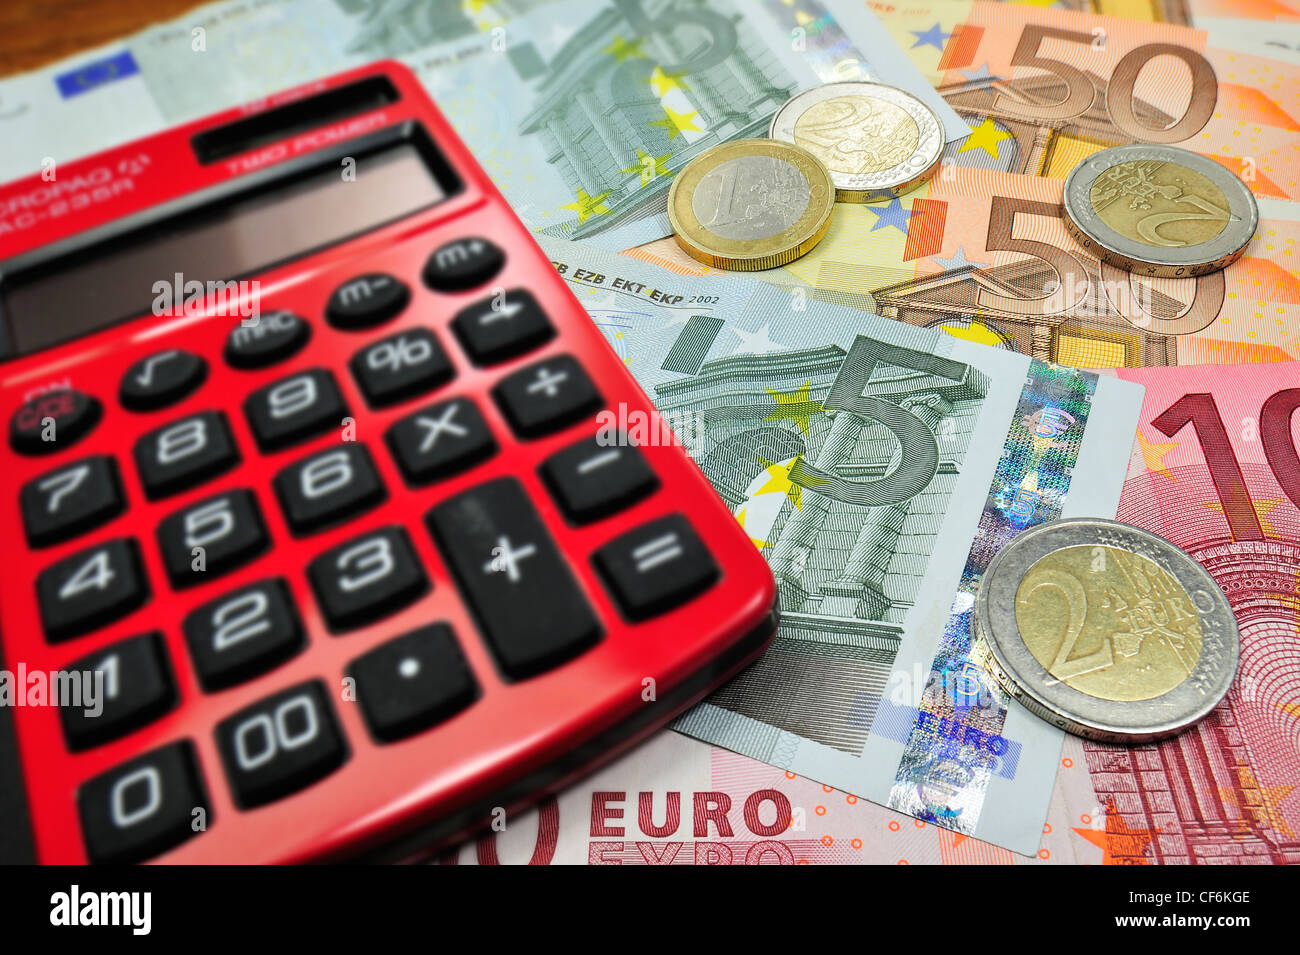 Conceptual image with banknotes and coins in euro currency and calculator to illustrate bank crisis in European Union countries Stock Photo